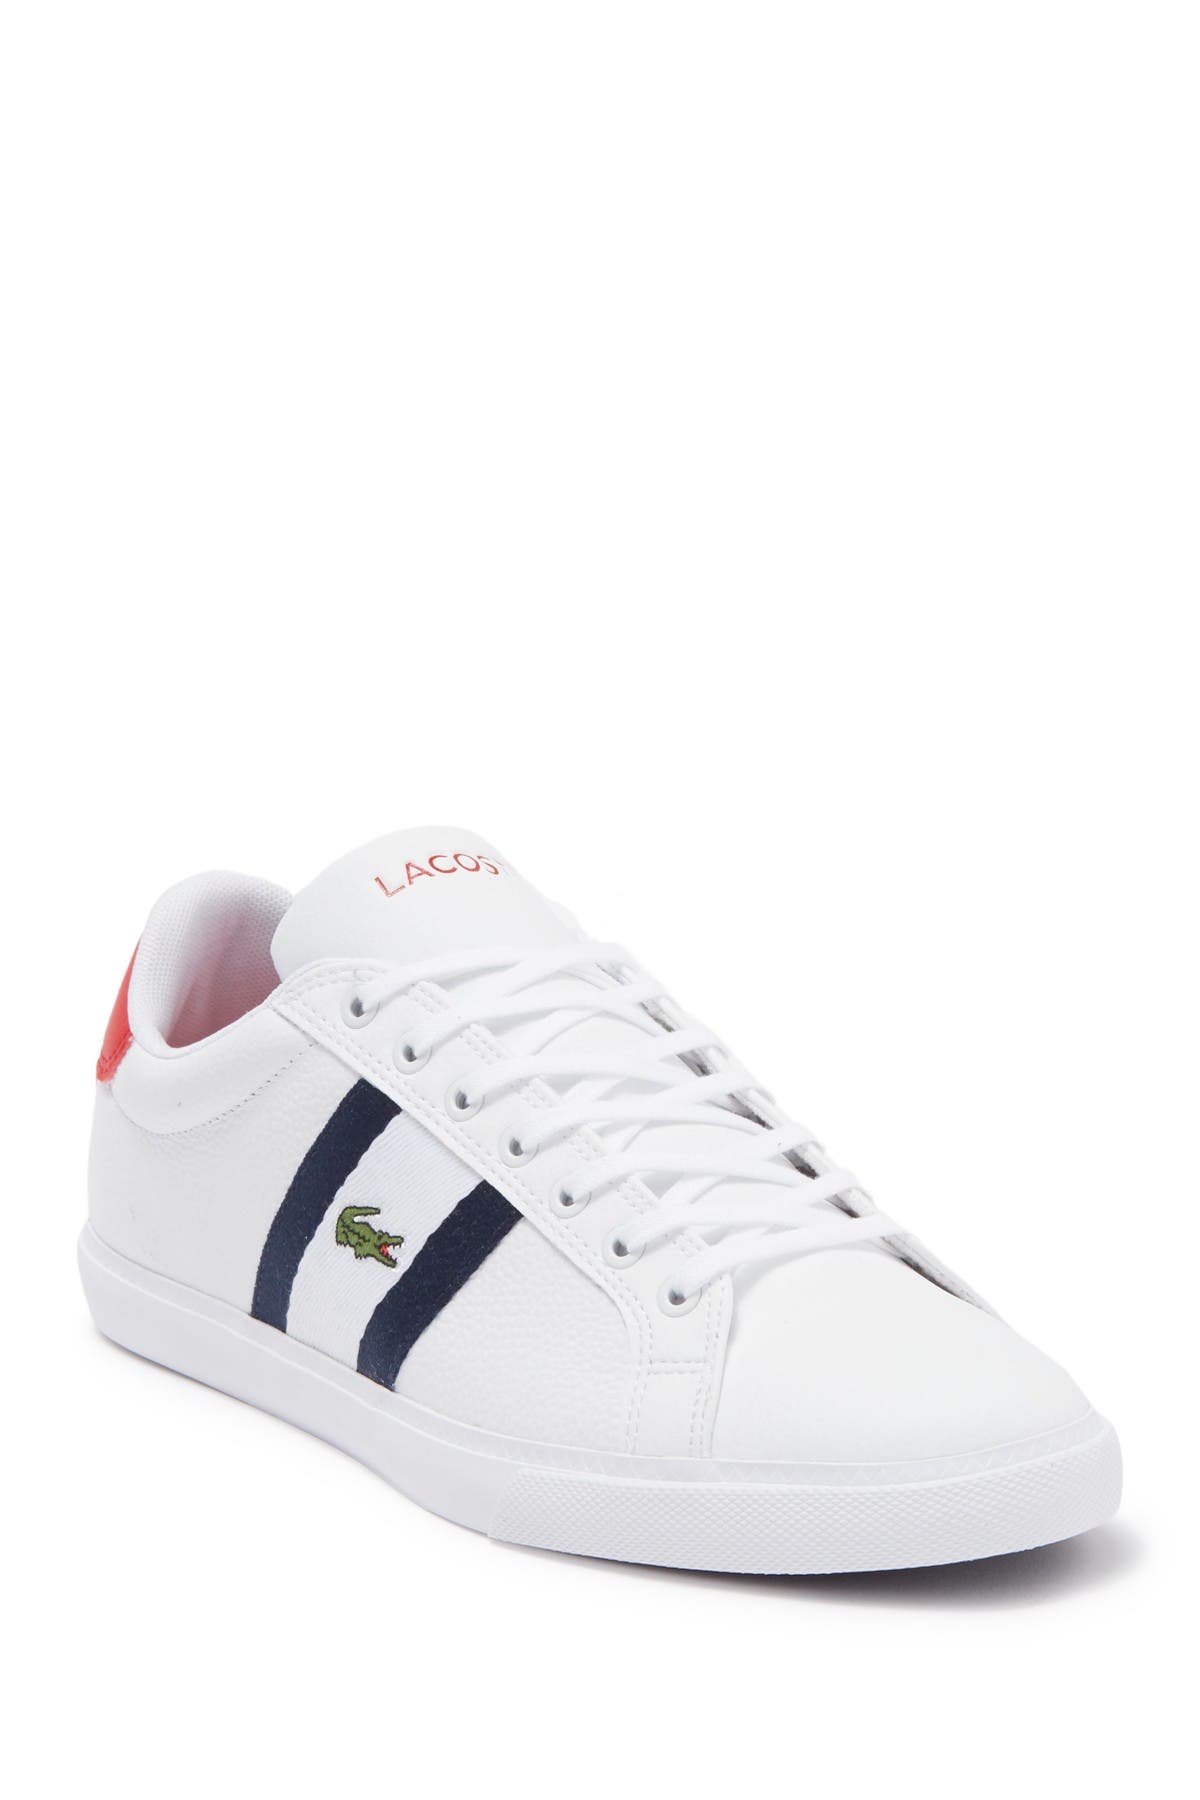 lacoste clearance canada